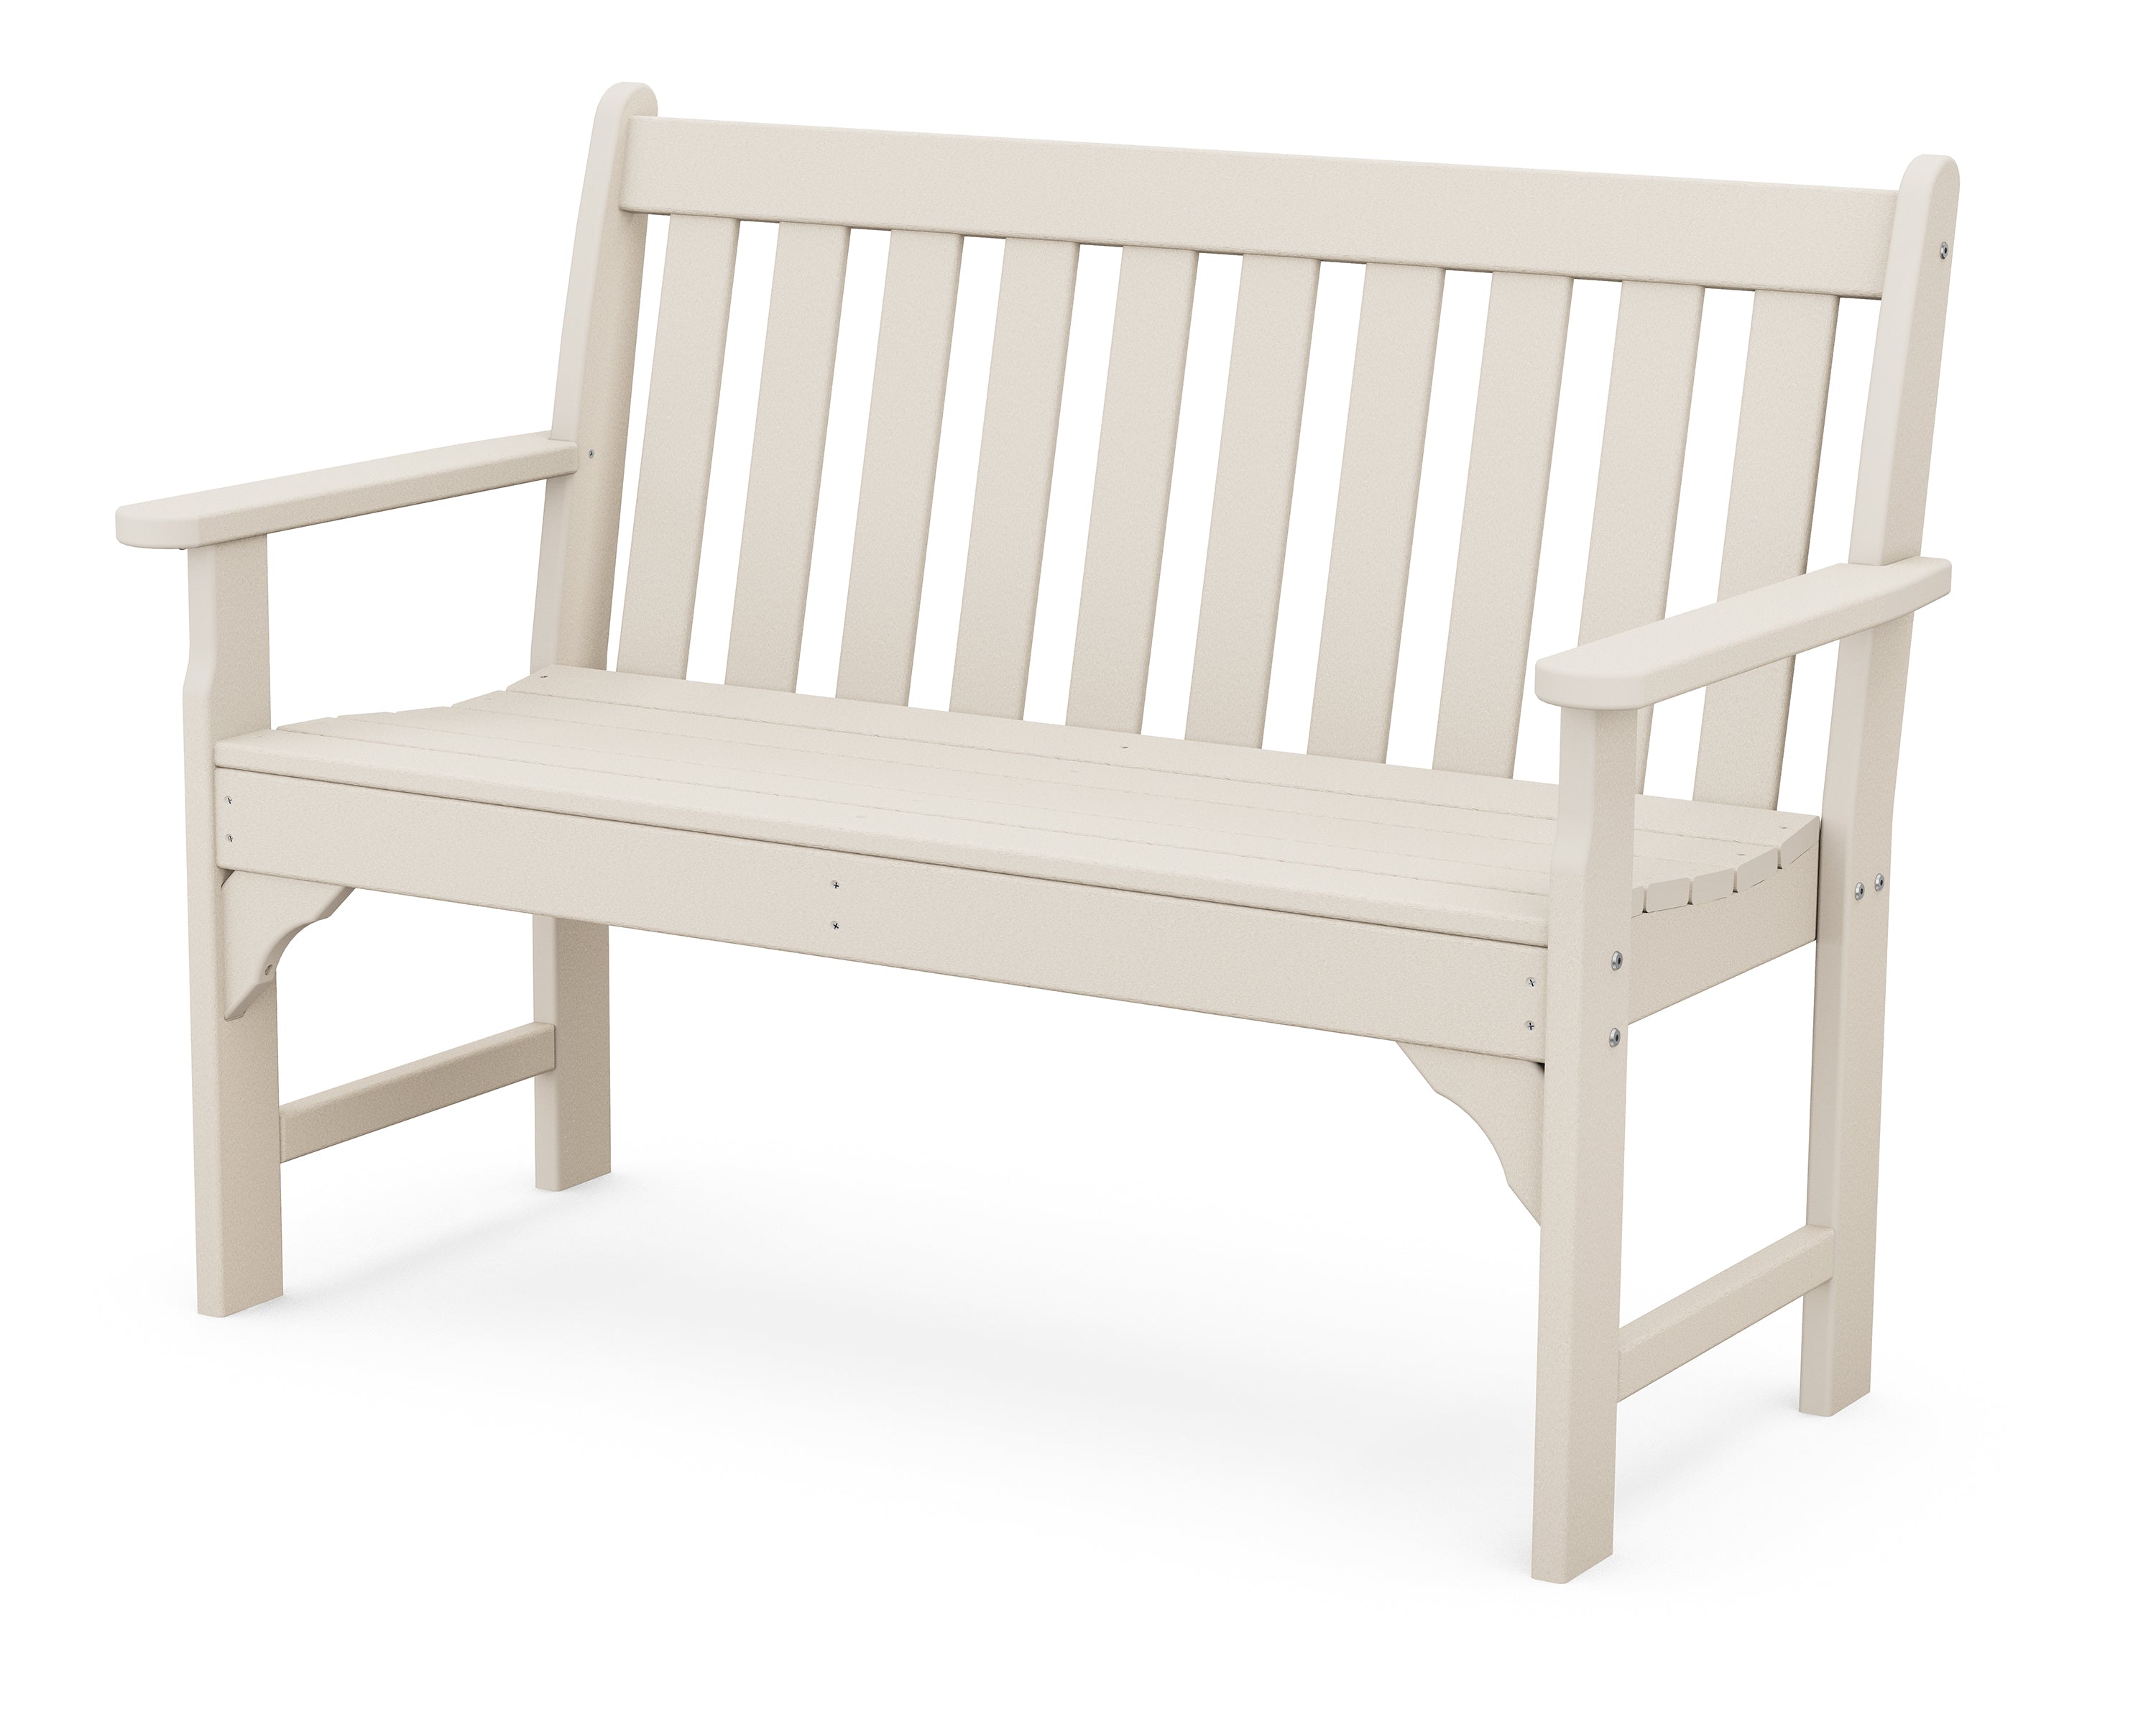 POLYWOOD® Vineyard 48" Bench in Sand